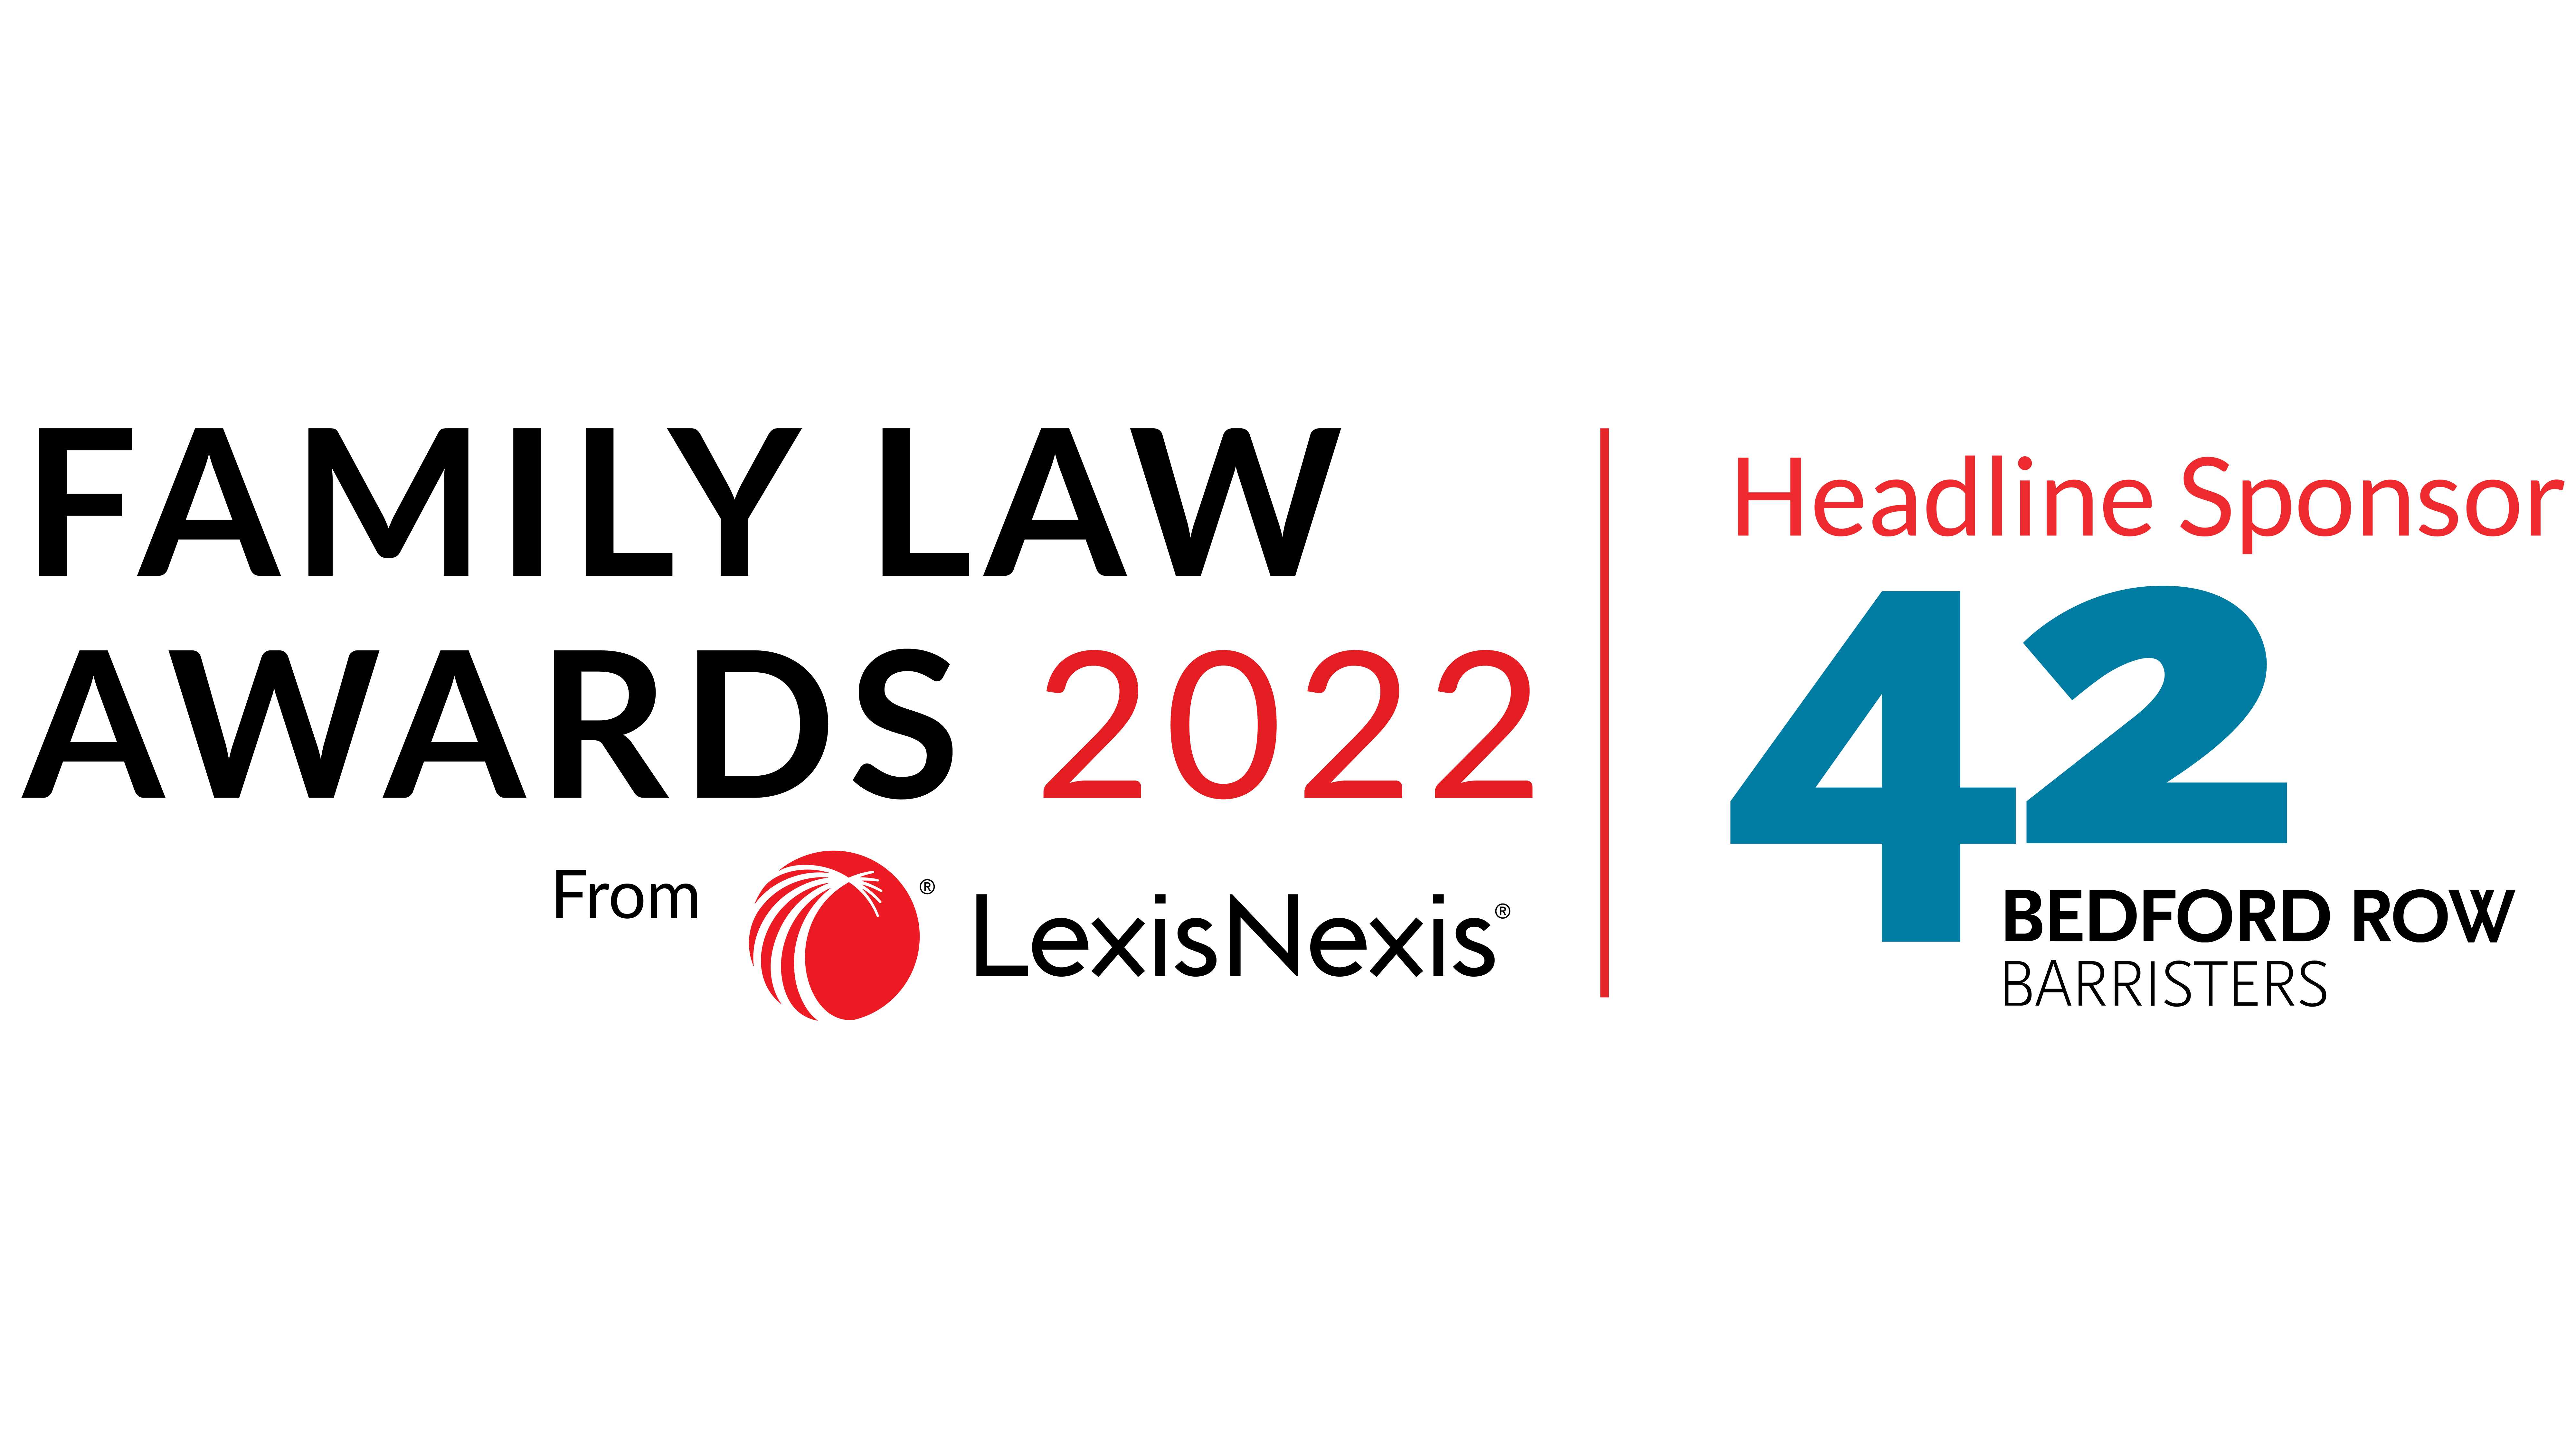 42BR shortlisted for the Family Law Awards 2022